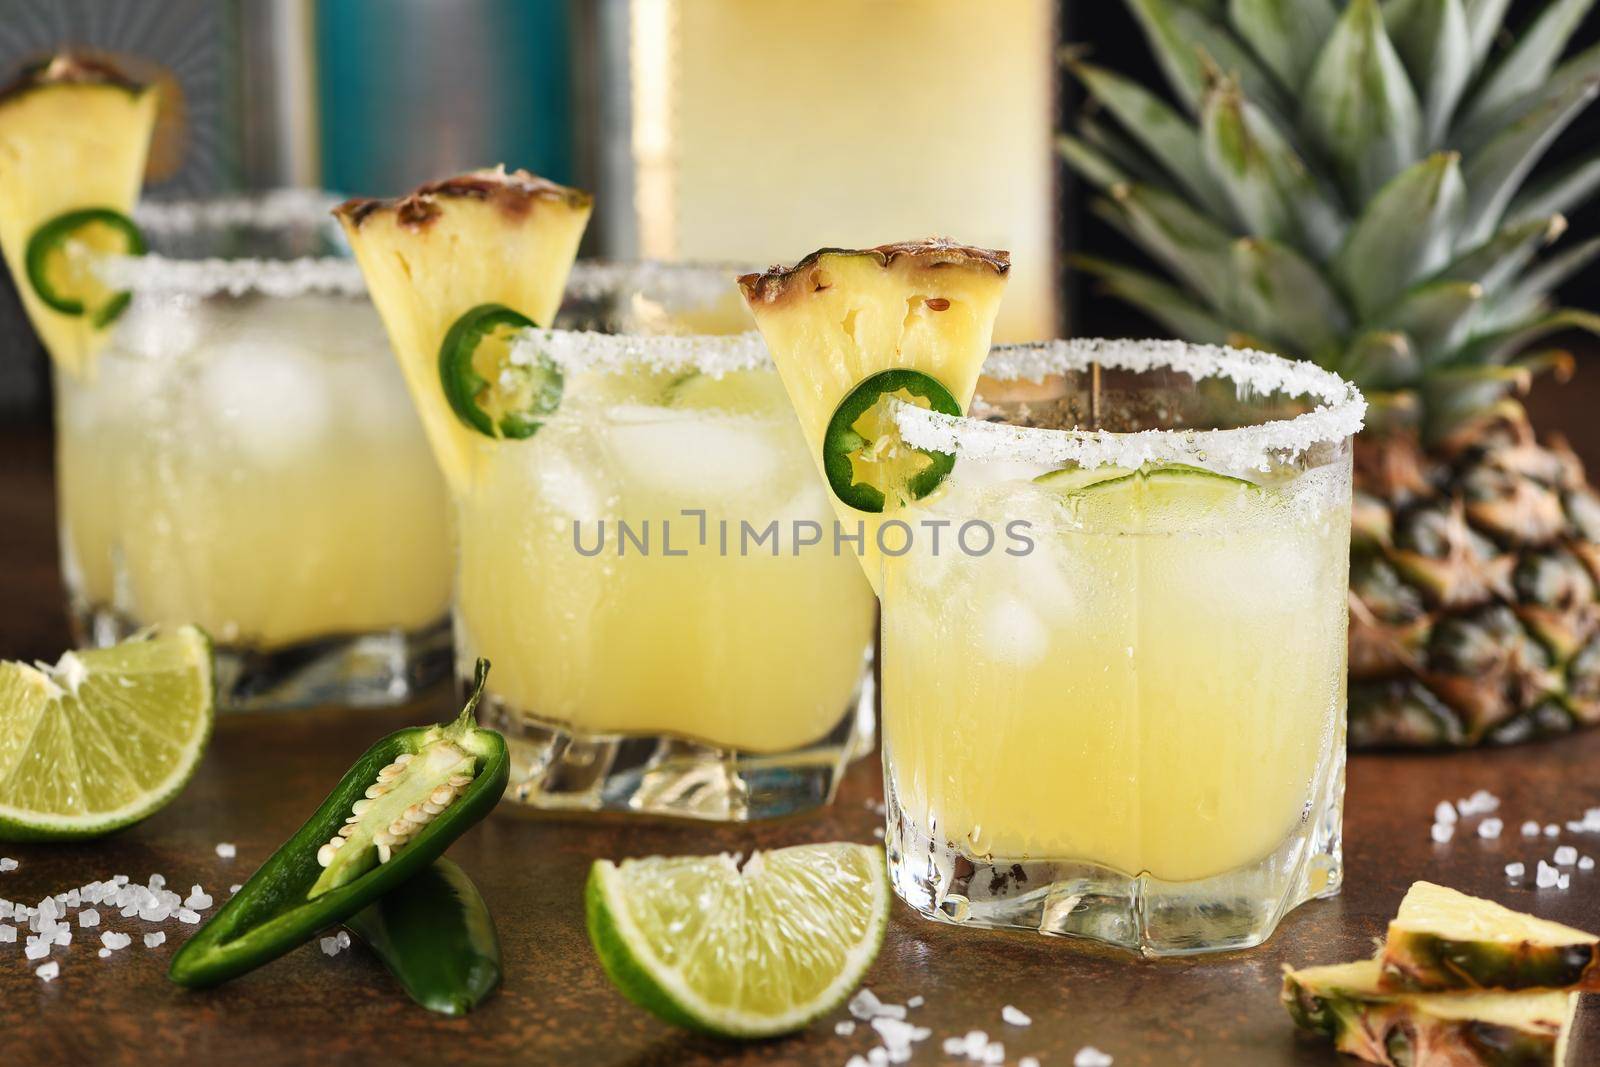 Pineapple Margarita with Jalapeno by Apolonia